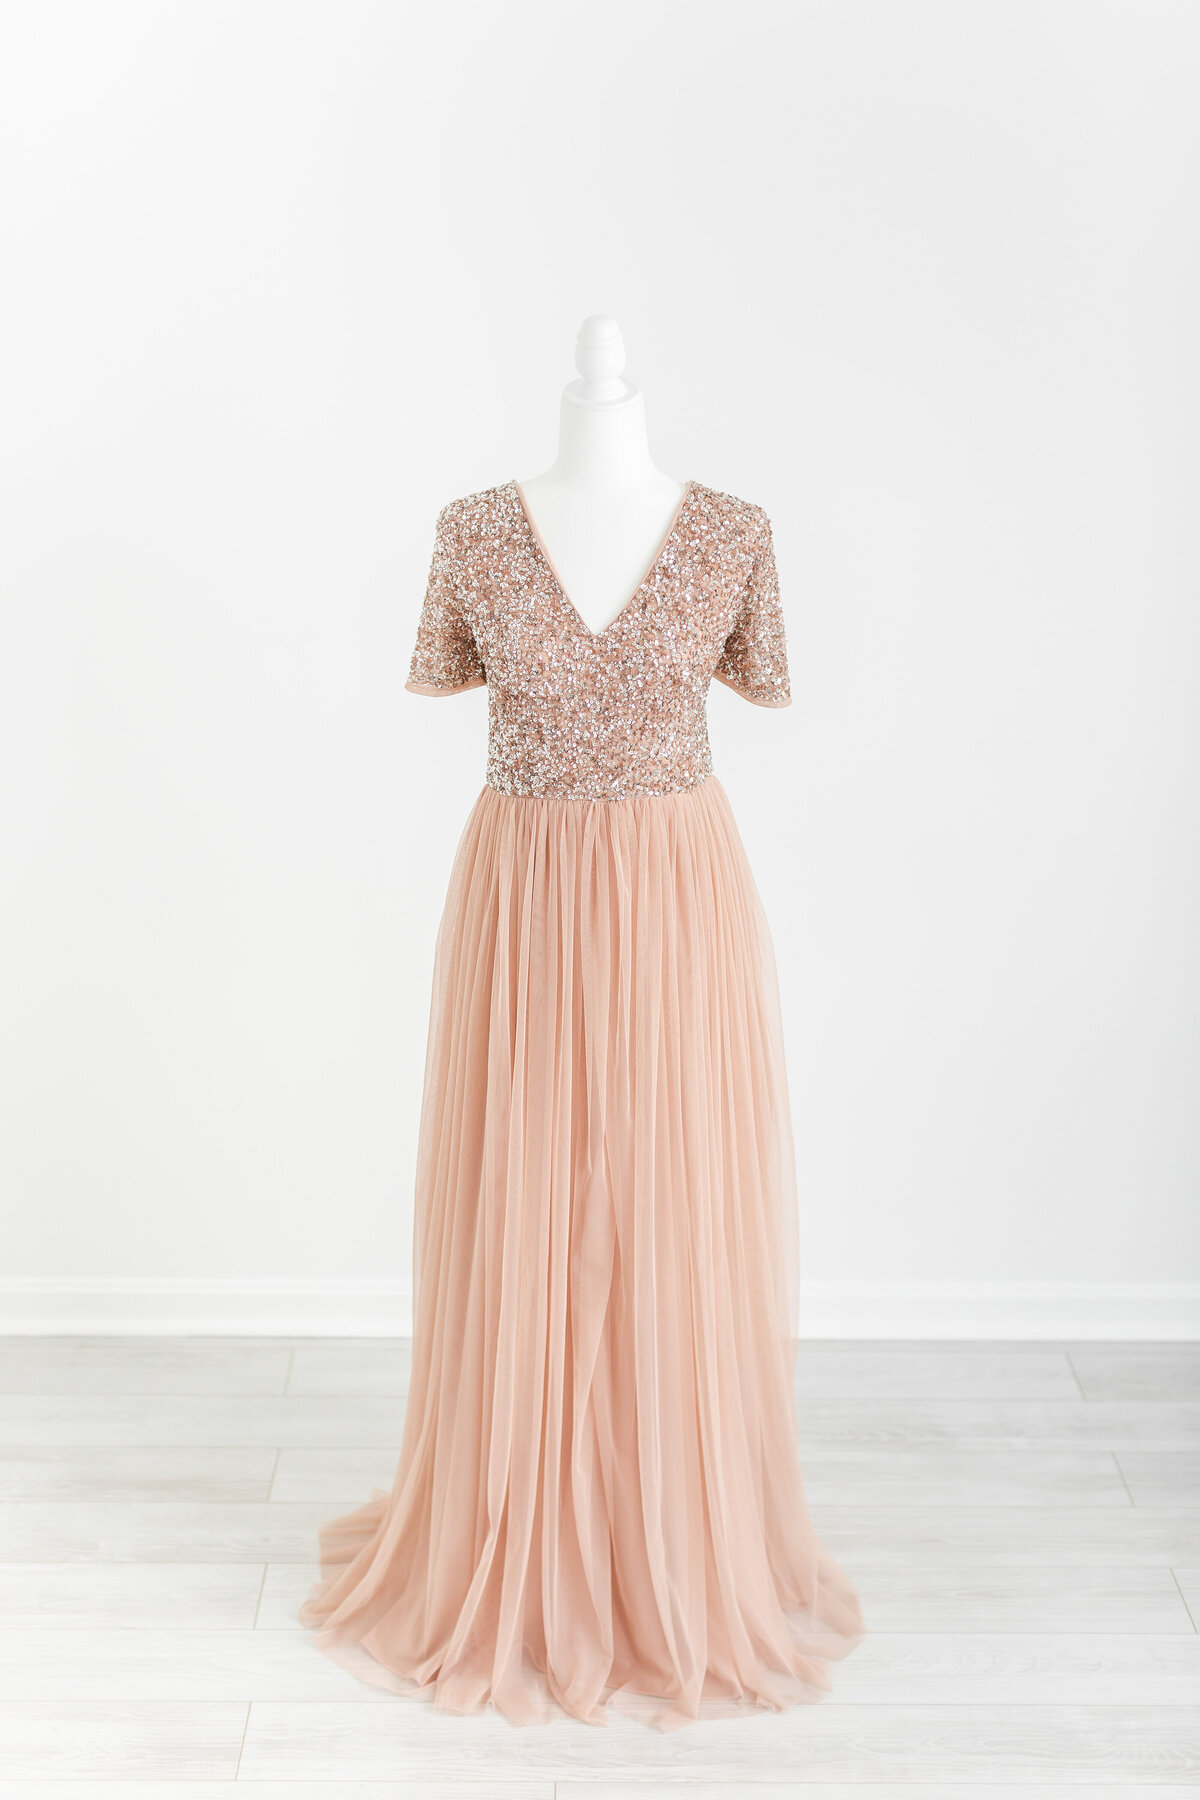 A flowy pink tulle dress with a sequin bodice by DC Newborn Photographer